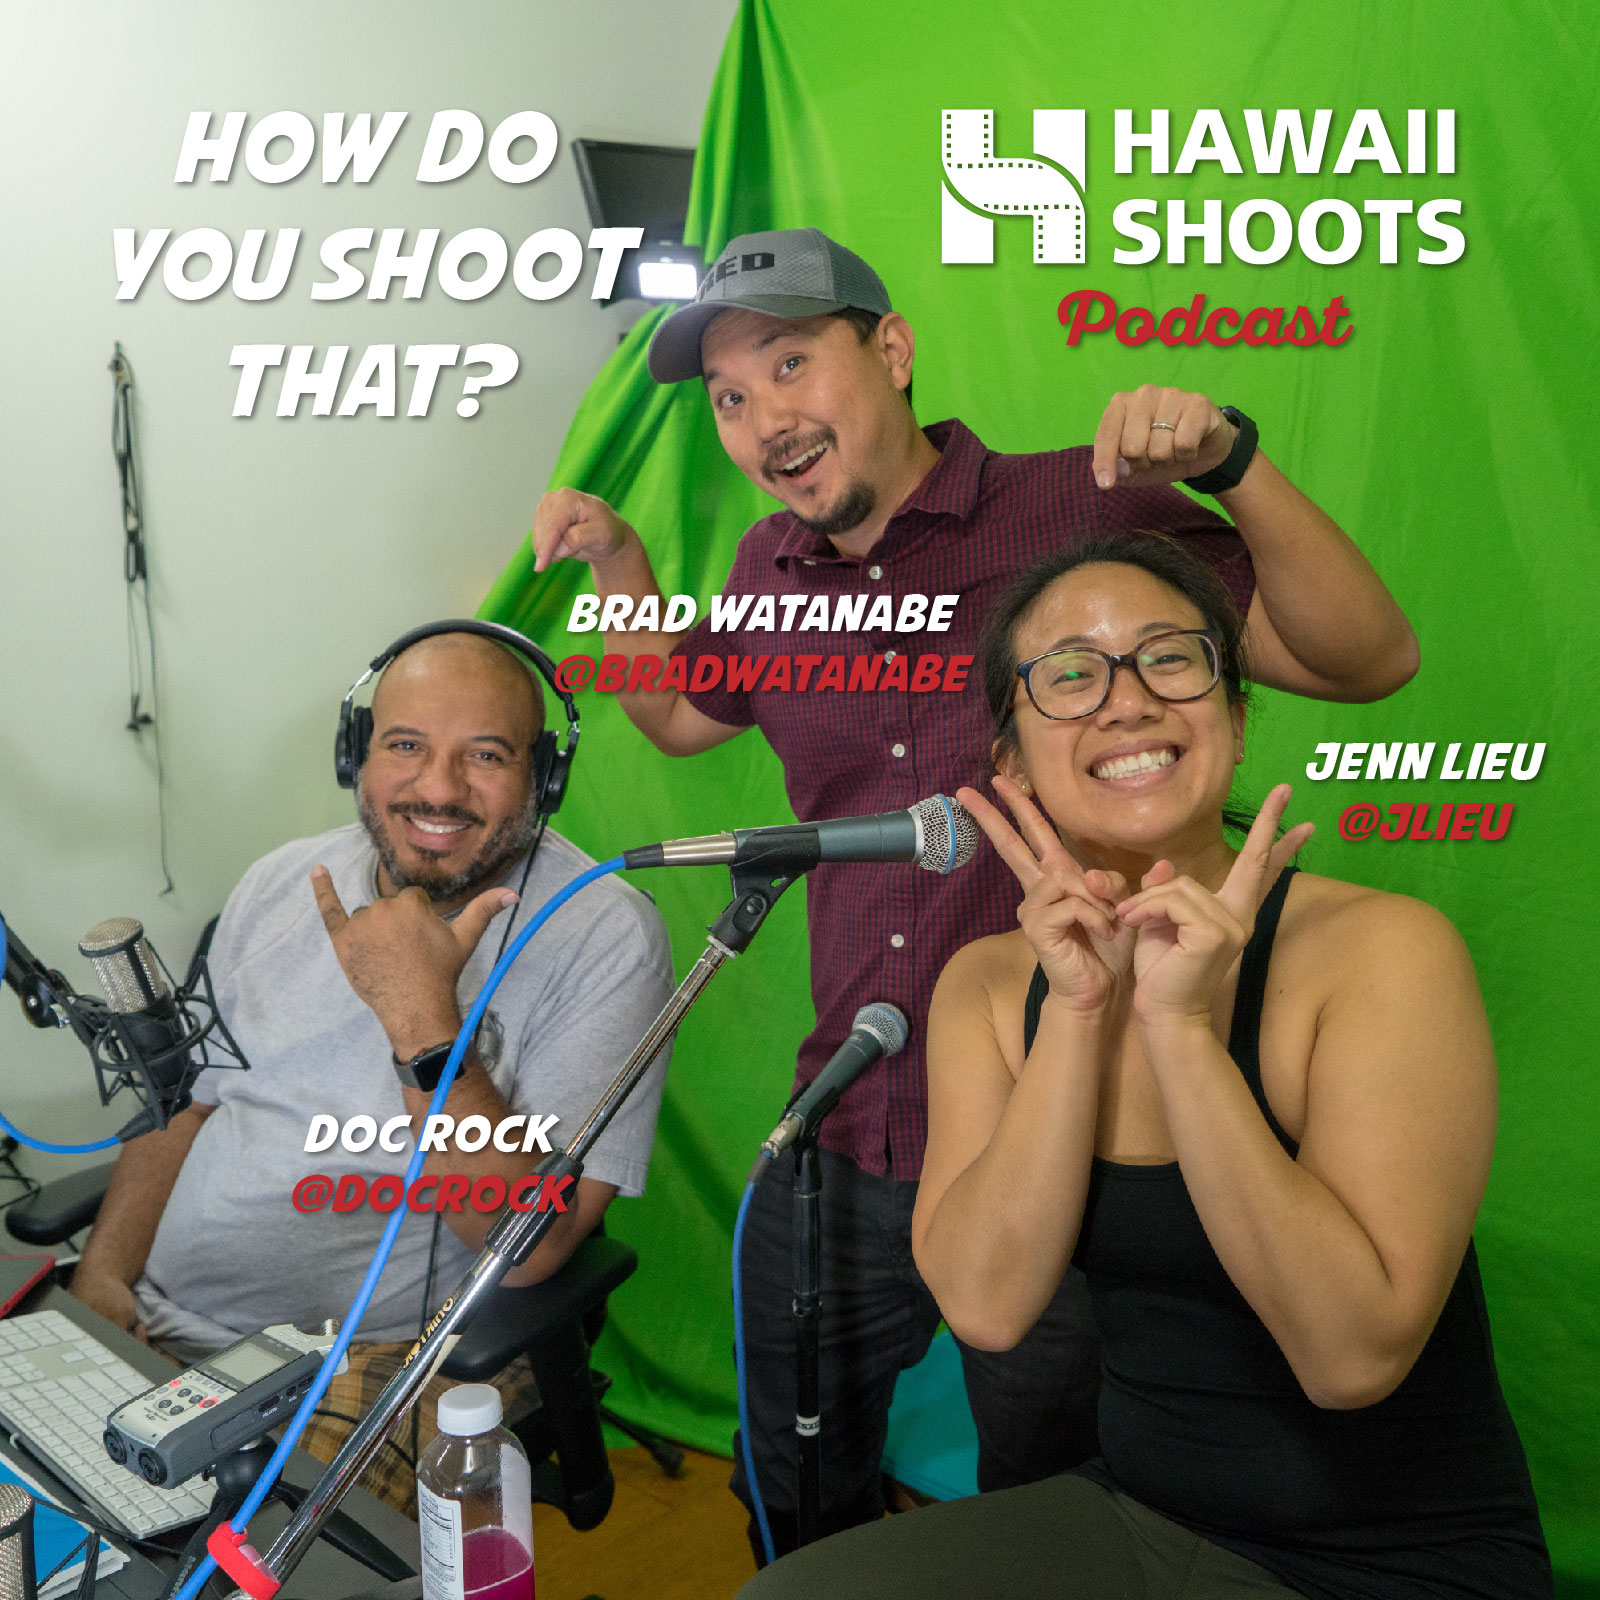 Hawaii Shoots Podcast: Getting Started with Youtube with guest Doc Rock 